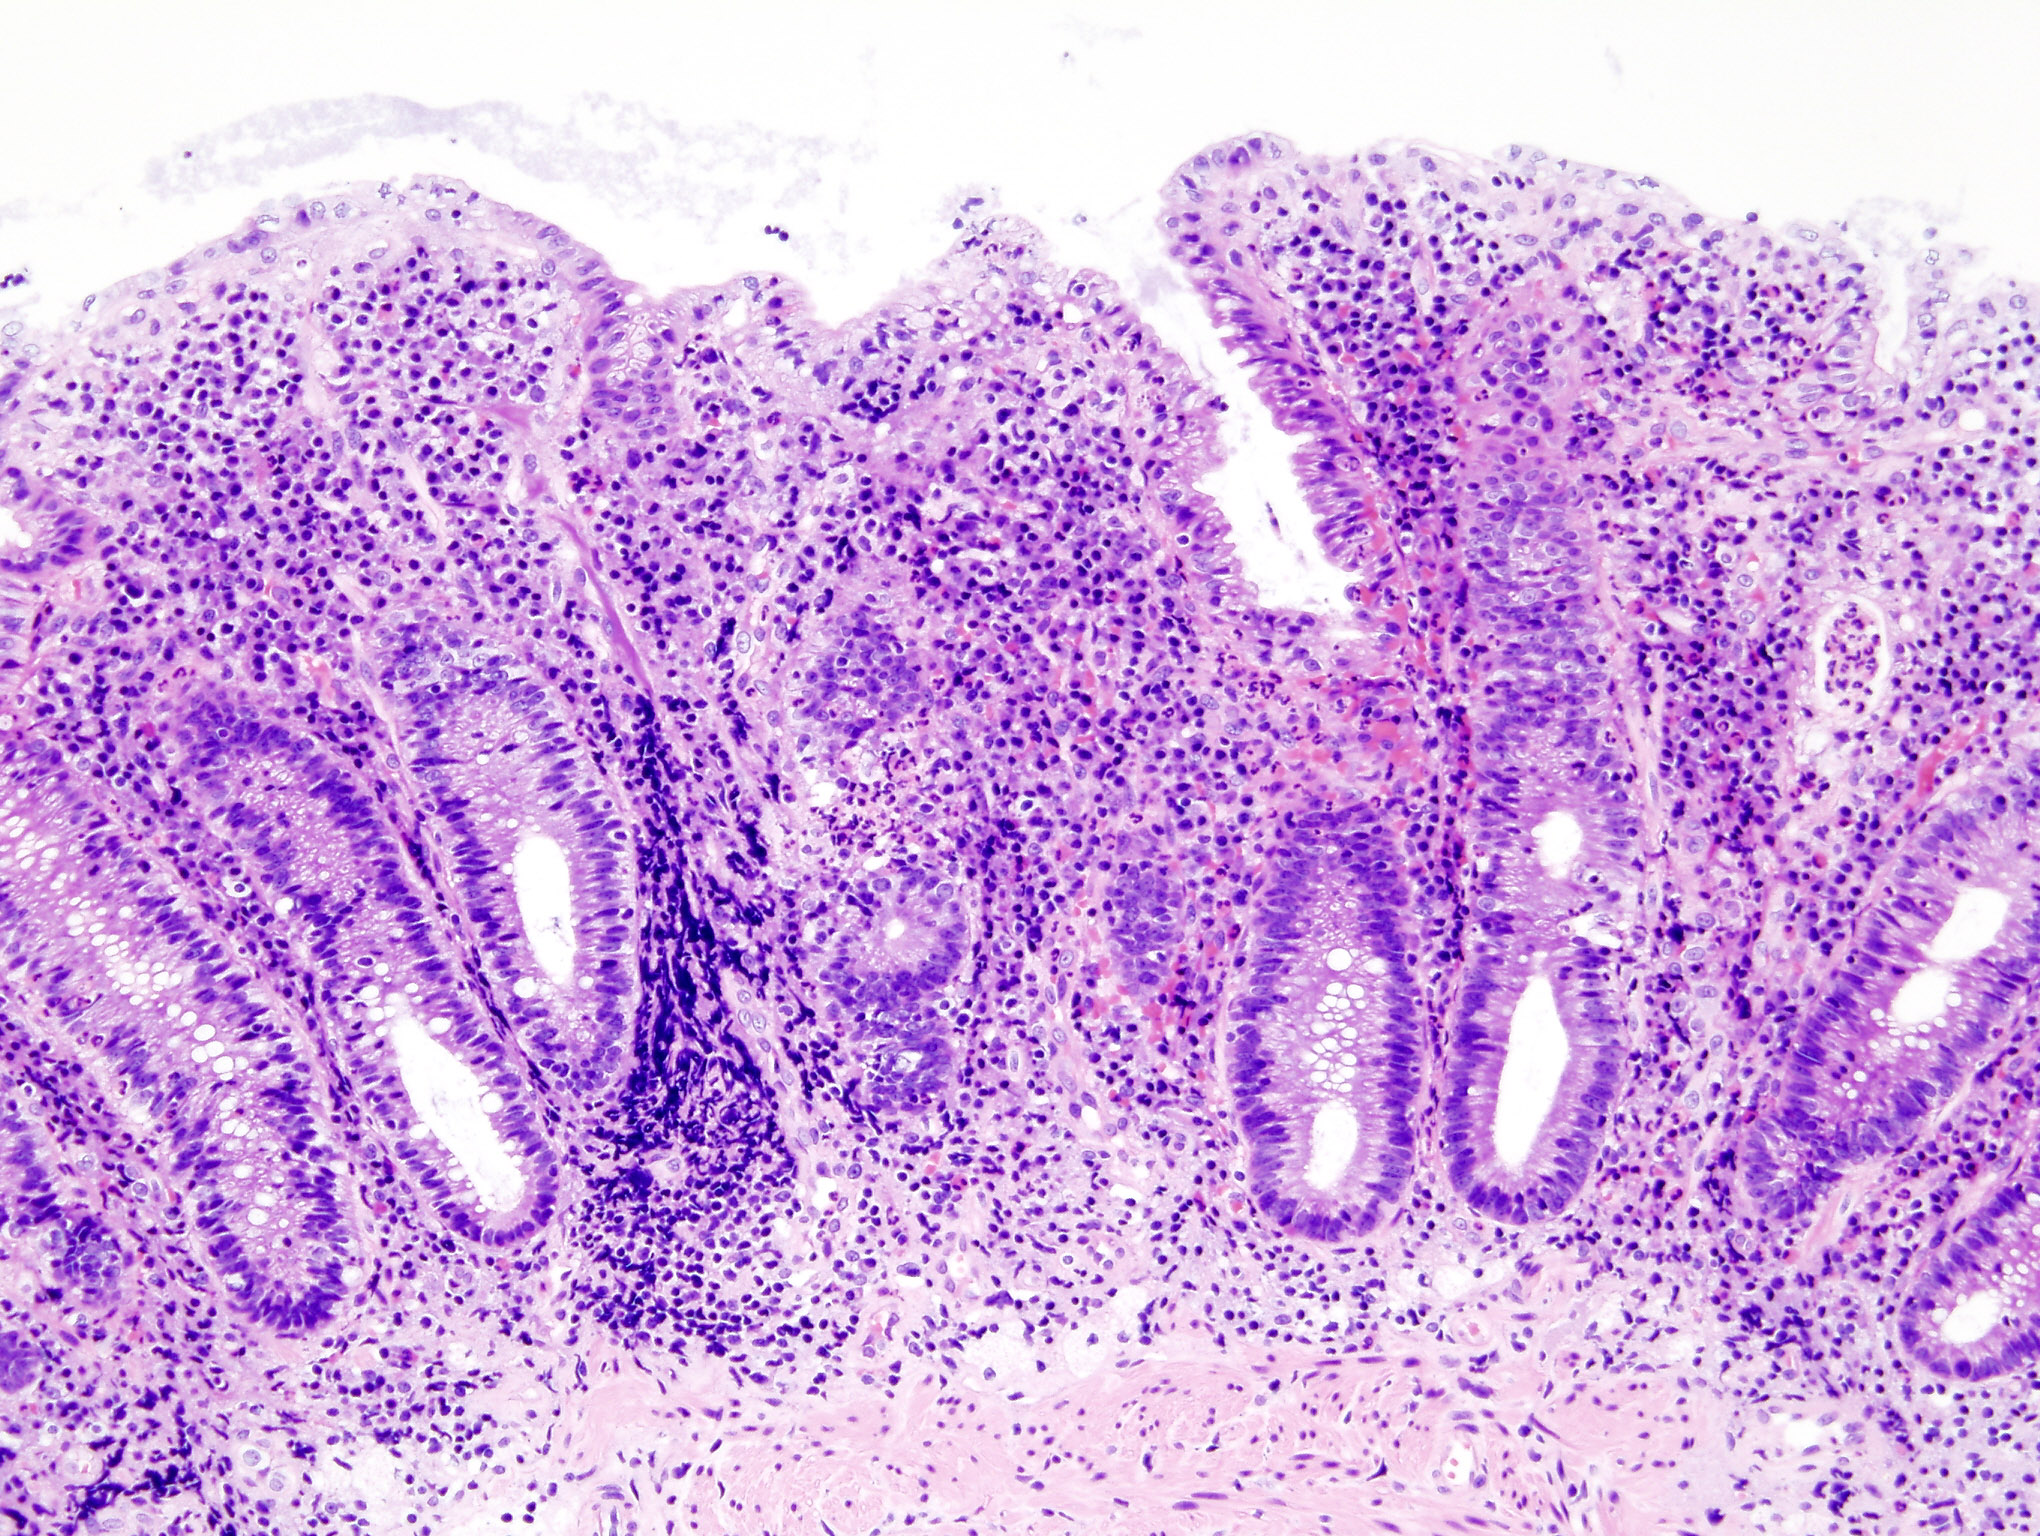 Ulcerative colitis. H&E stain showing marked lymphocytic infiltration (blue/purple) of the intestinal mucosa and distortion of the architecture of the crypts. [48]